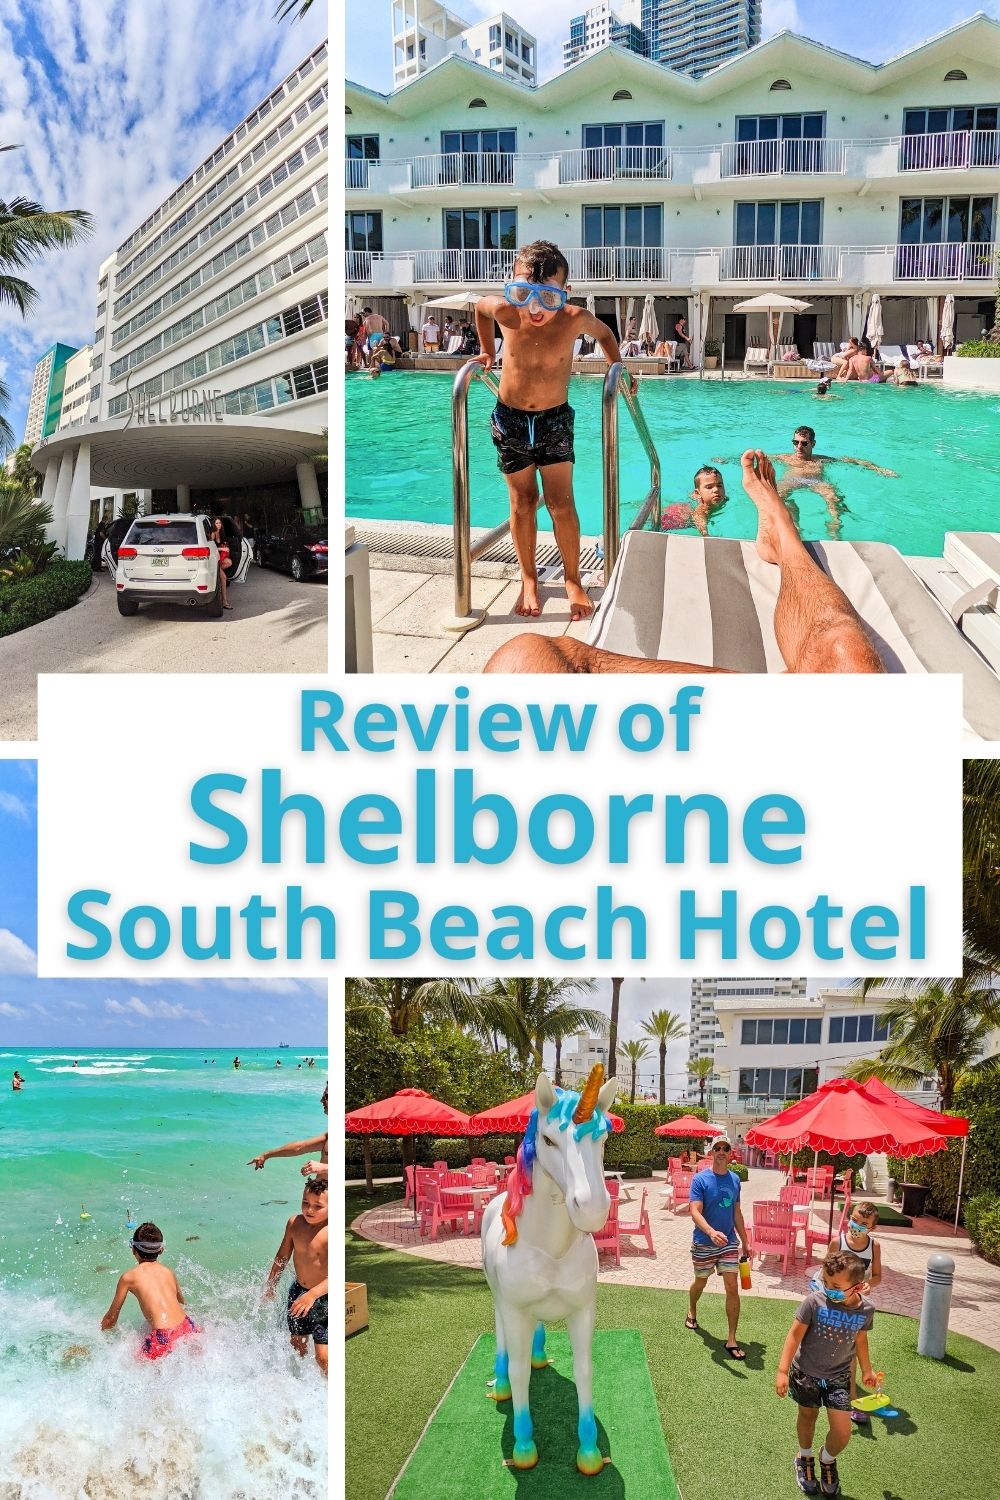 Review of the Shelborne South Beach hotel in Miami, including things to do and dining recommendations in the Art Deco District of Miami Beach. Tips for planning a fun weekend getaway to the Shelborne on the beach.